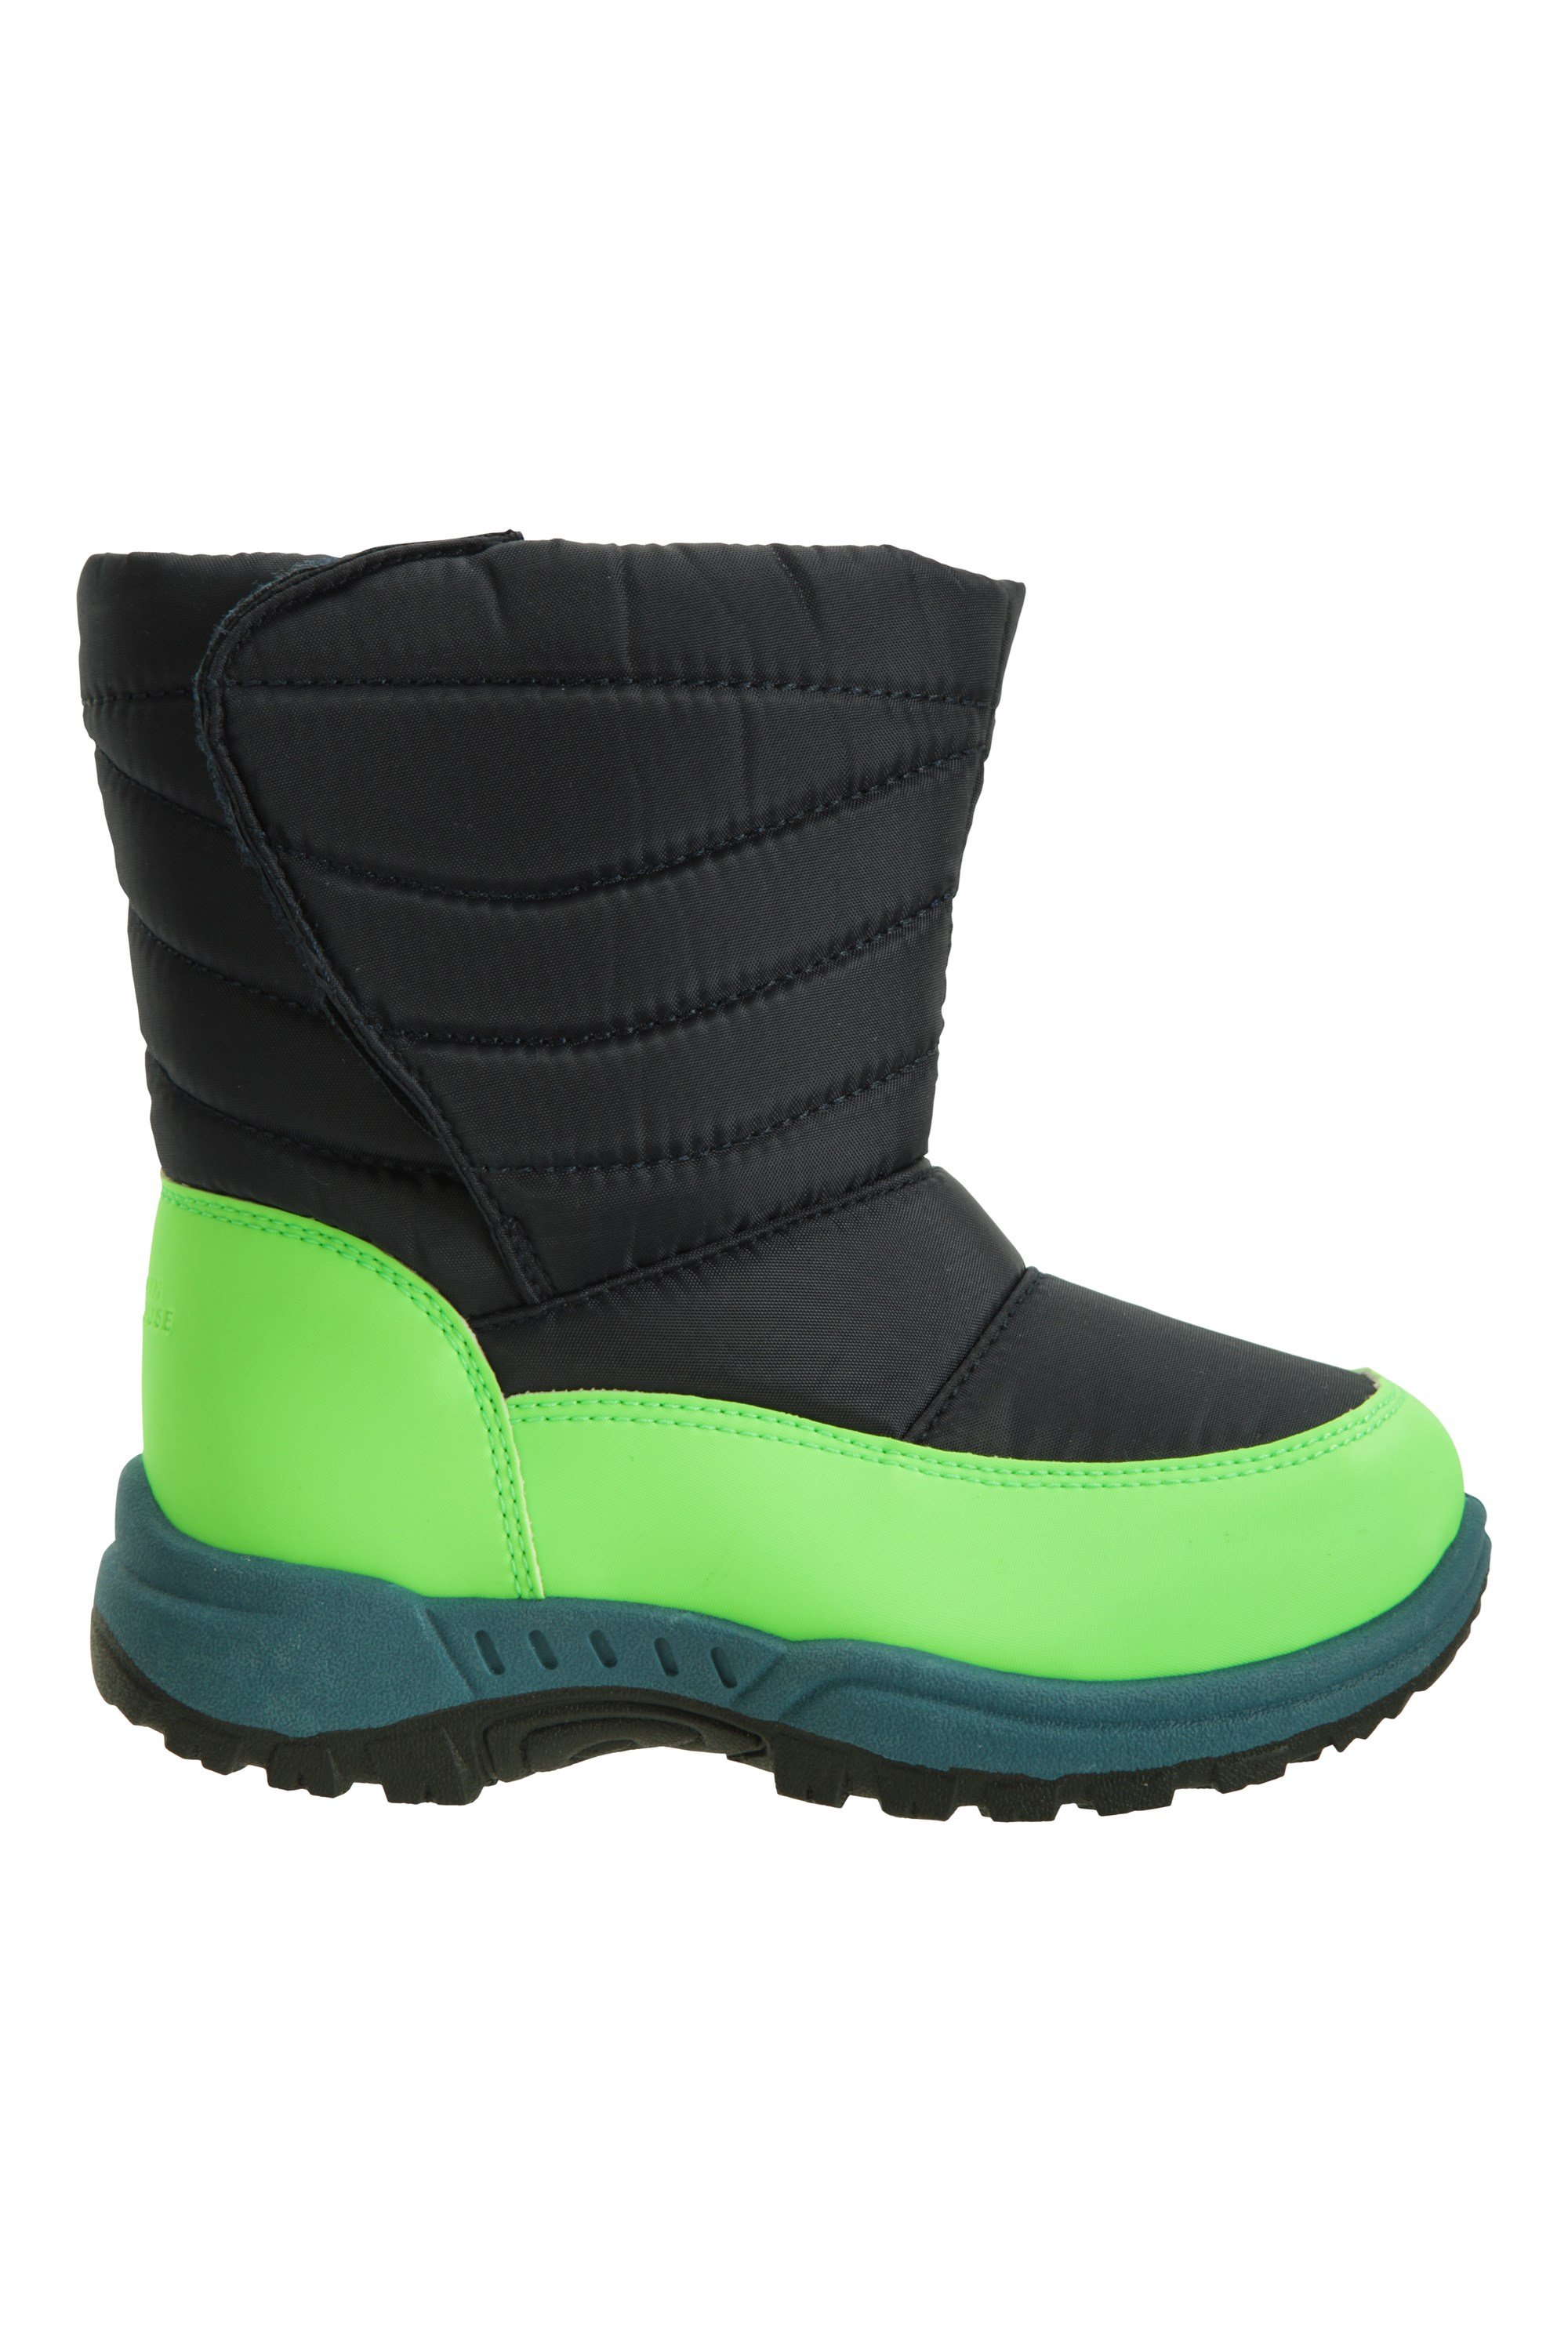 mountain warehouse childrens snow boots